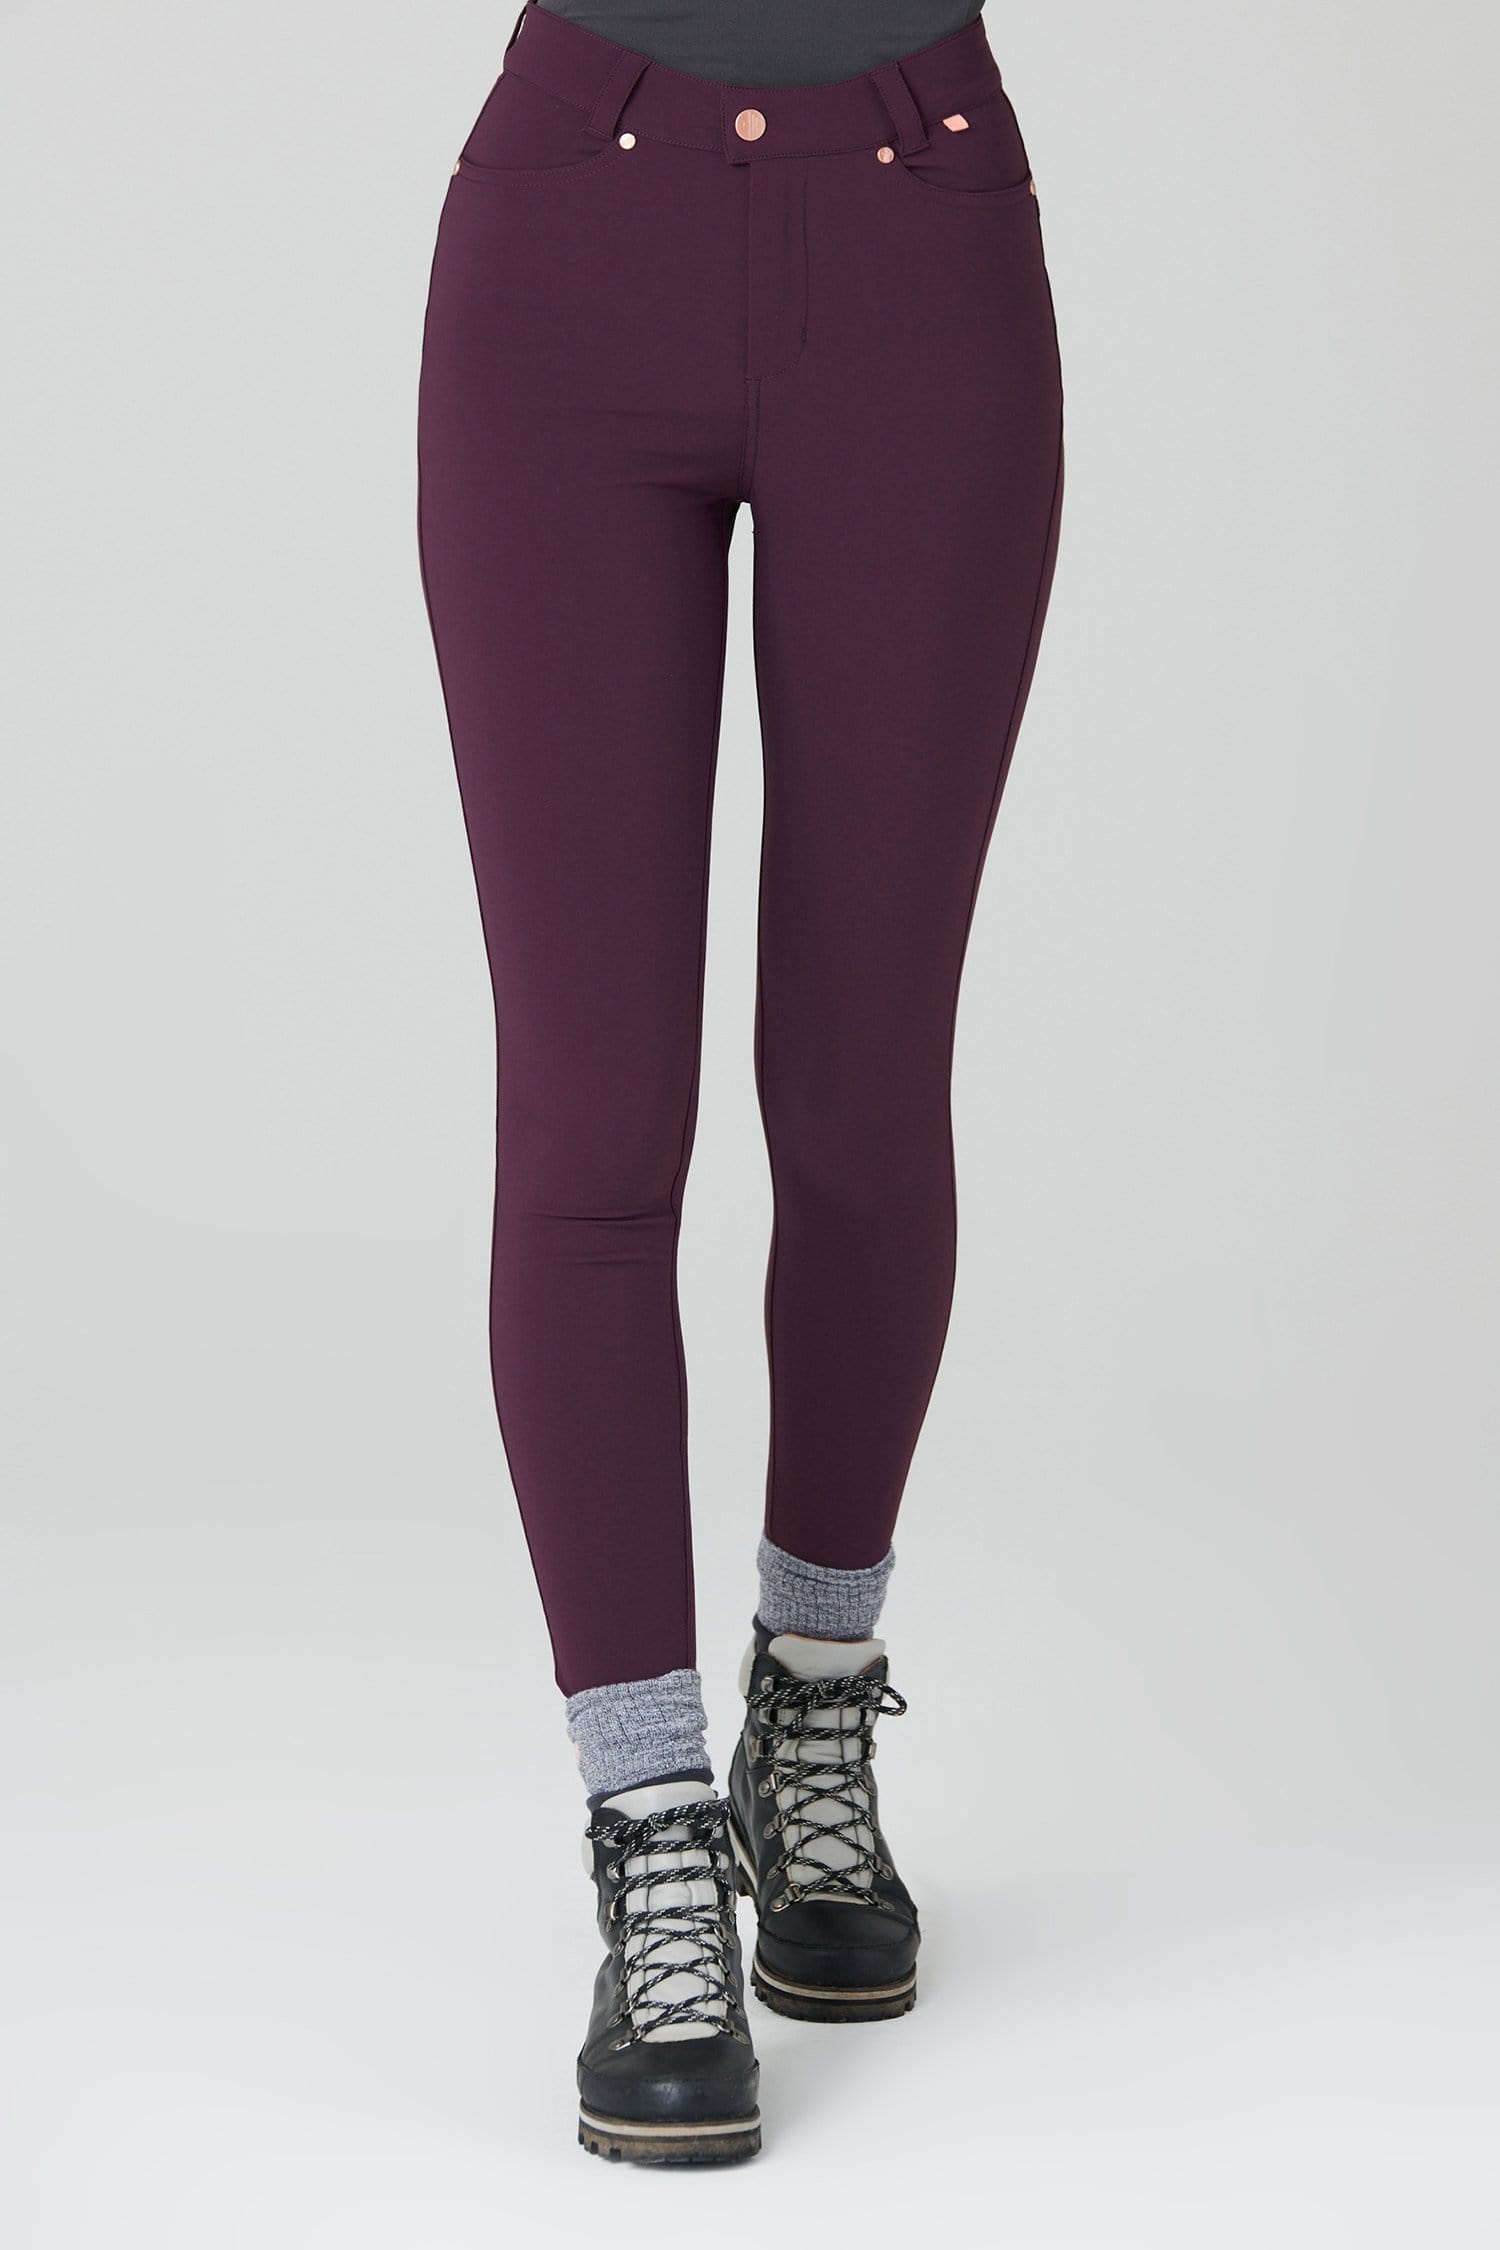 Max Stretch Skinny Outdoor Trousers - Aubergine - 30l / Uk12 - Womens - Acai Outdoorwear